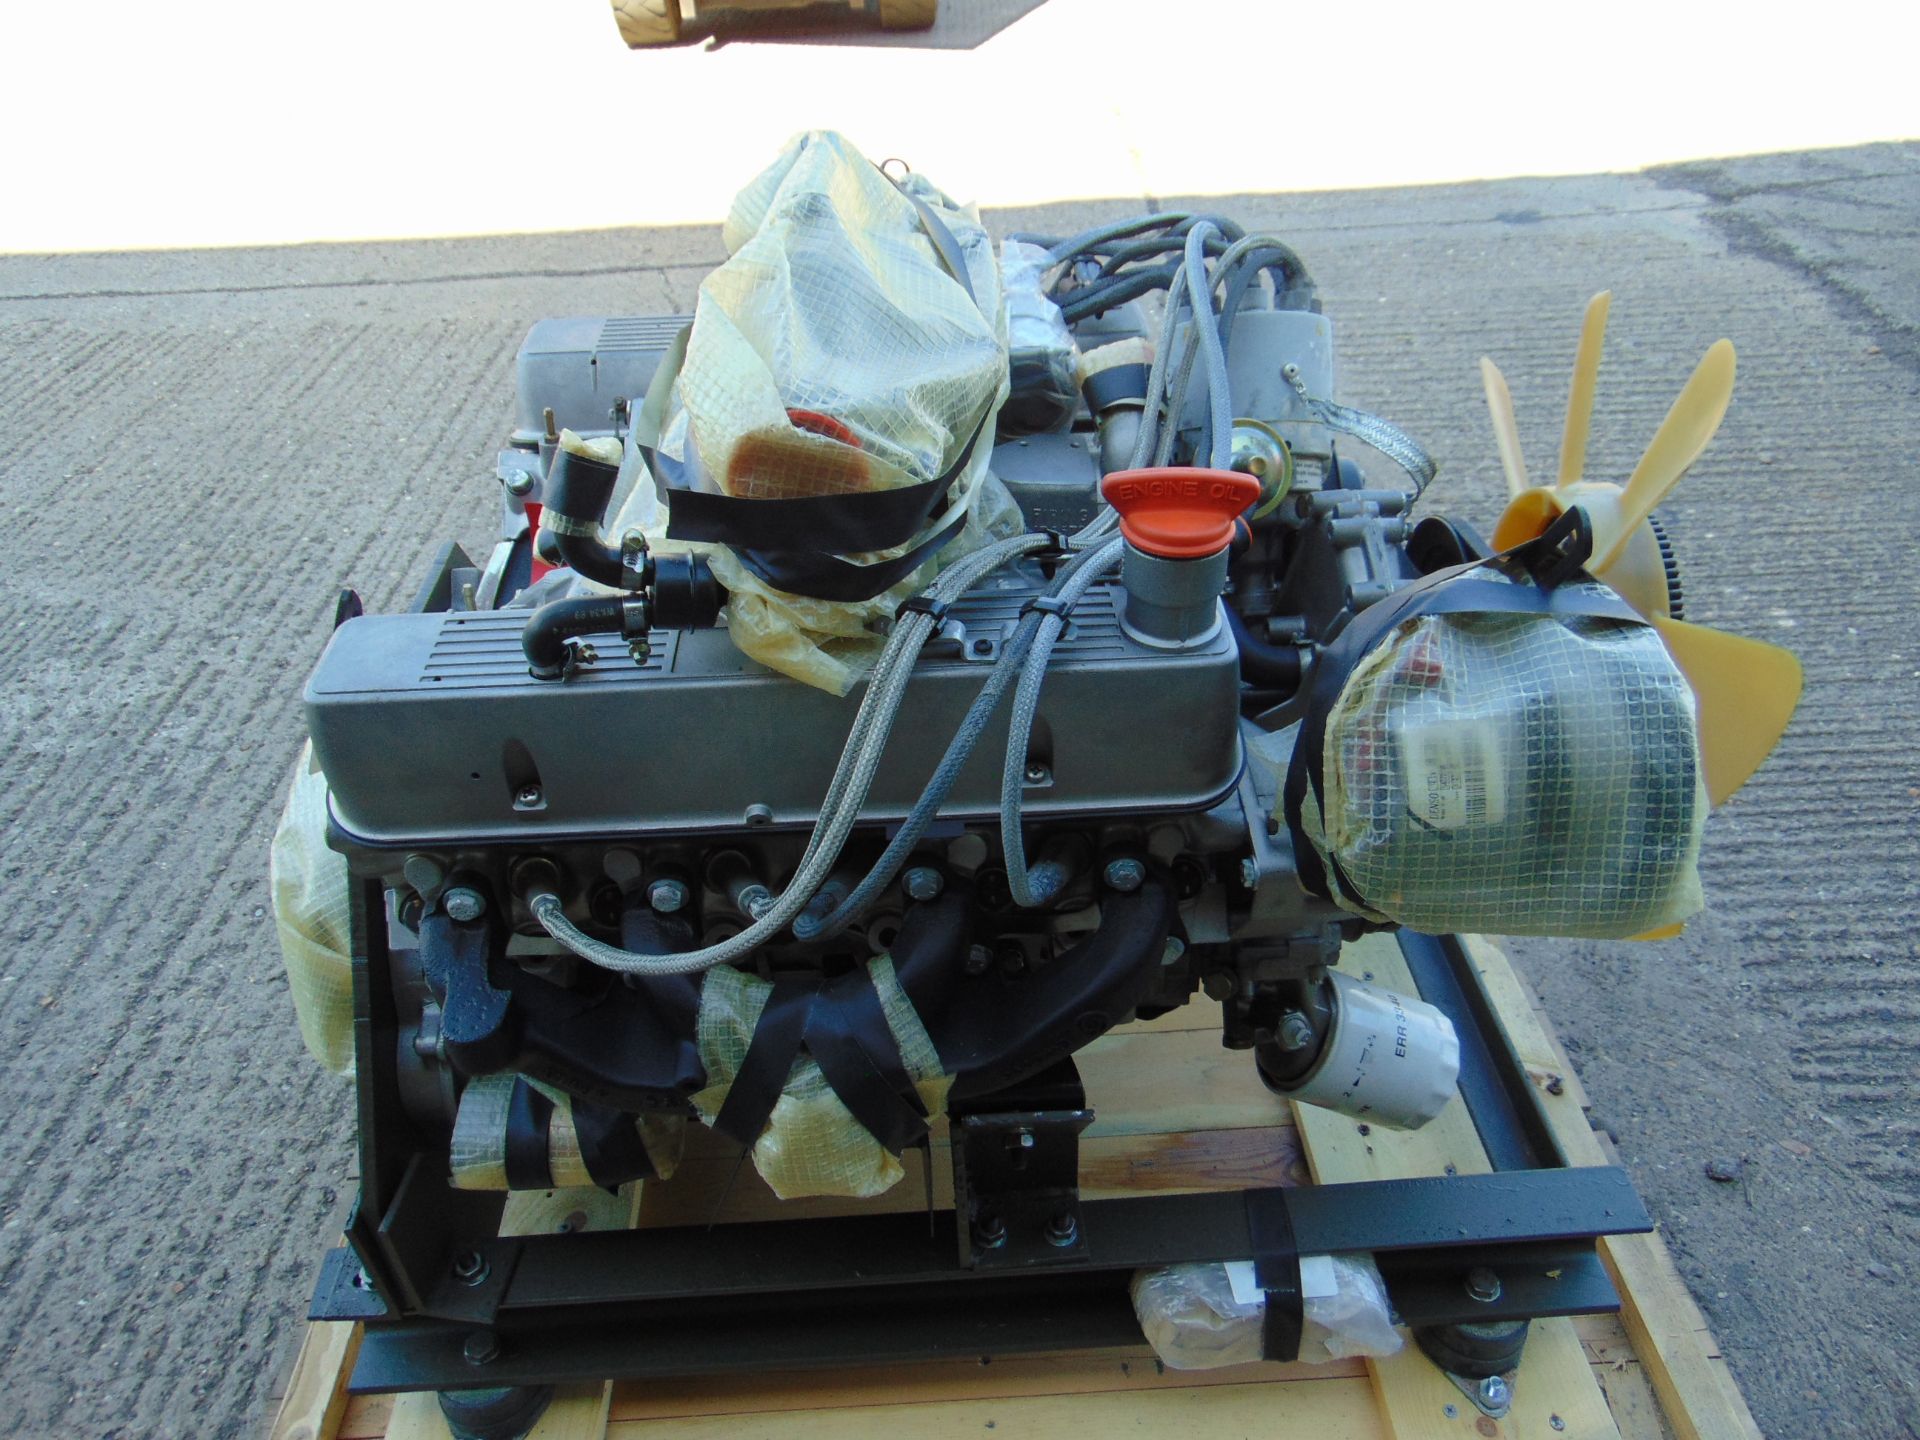 Fully Reconditioned Land Rover V8 Engine c/w all Accessories, as shown in Crate etc - Image 5 of 21